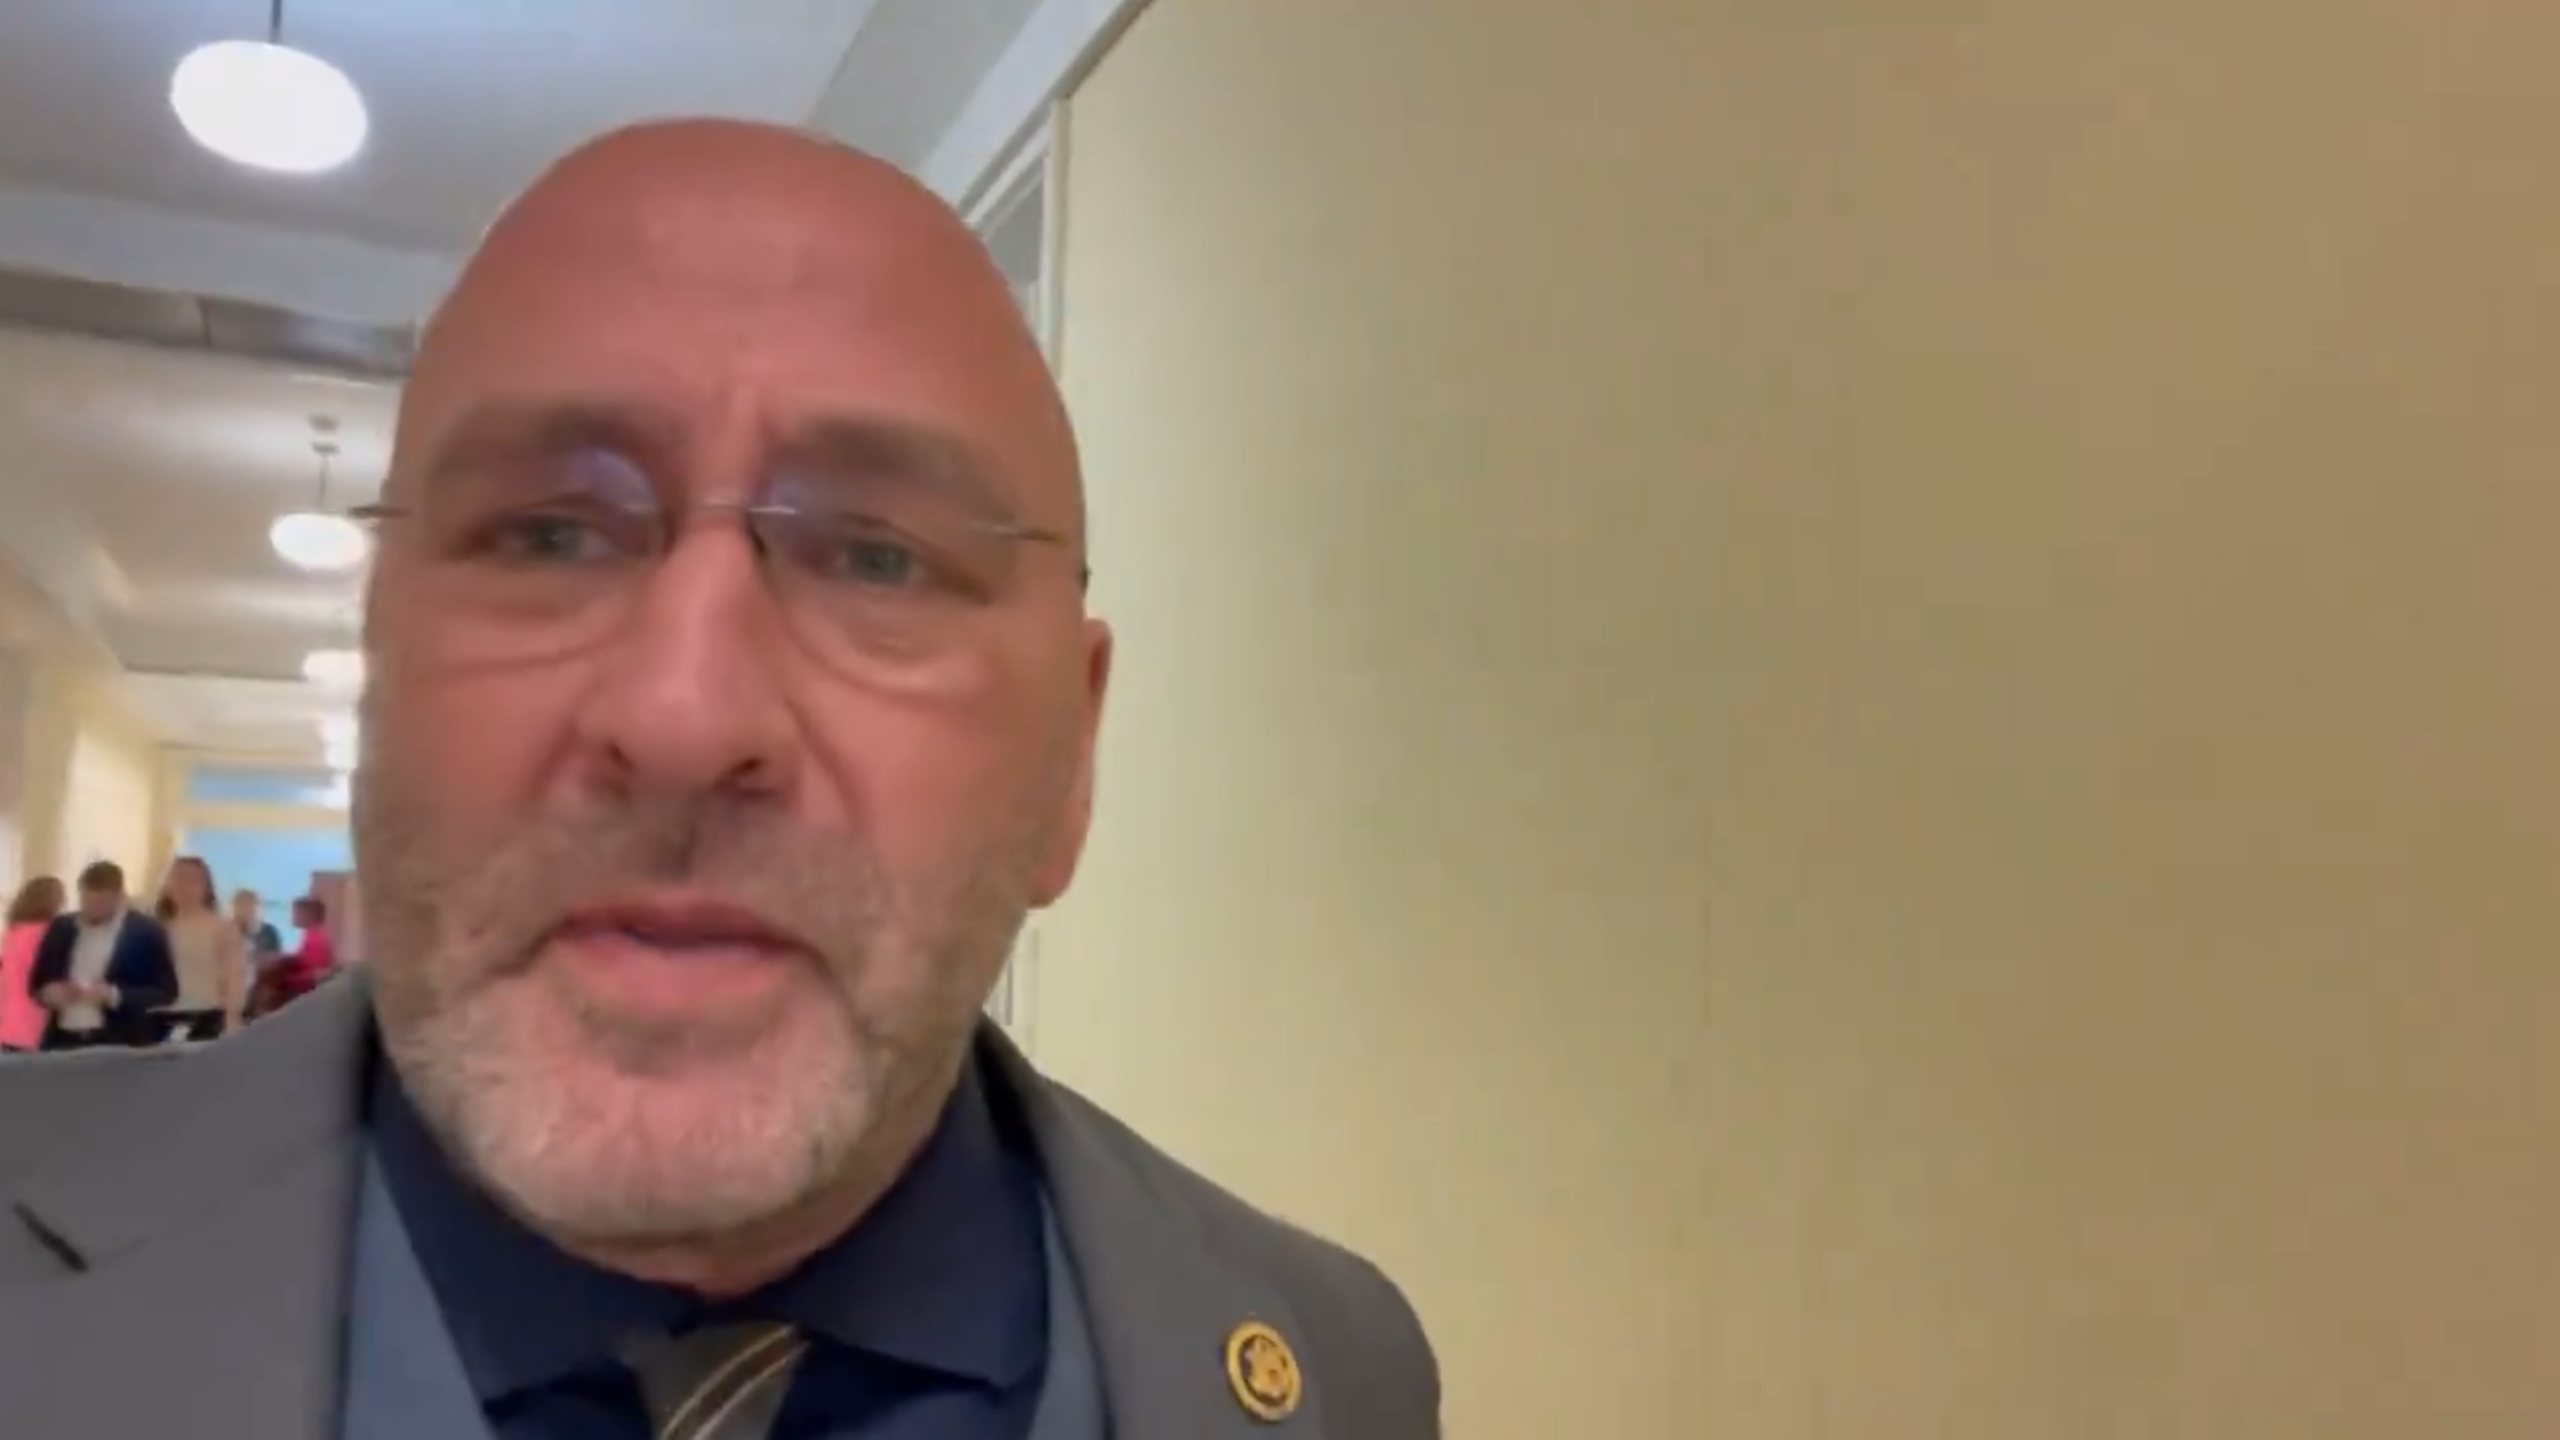 Clay Higgins Scolds ‘Friend’ Marjorie Taylor Greene for ‘Abhorrent’ Attempt to Oust Speaker